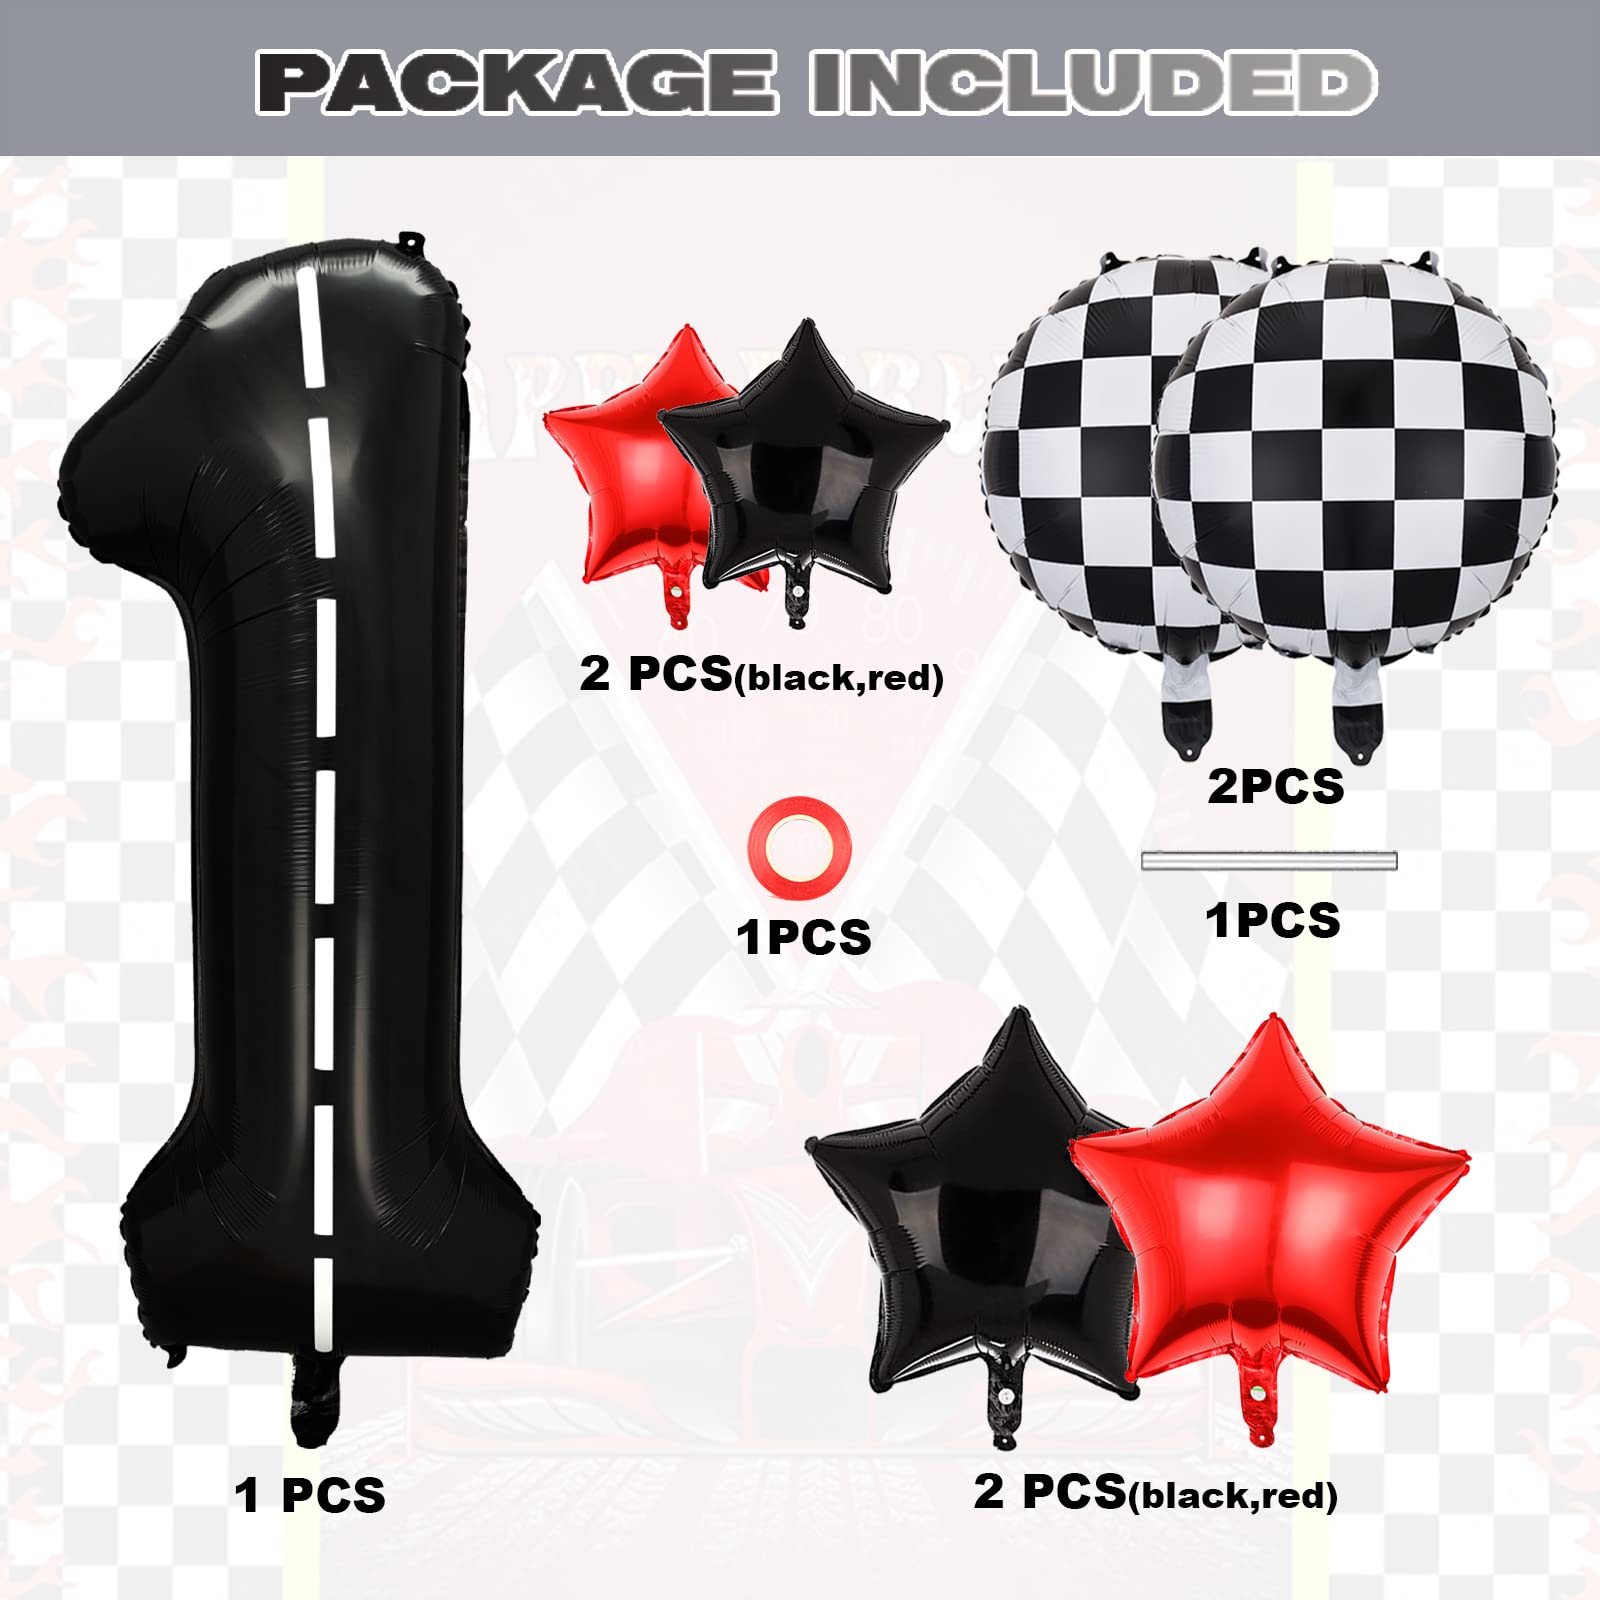 Race Car Birthday Party Balloons,40 Inch Big Mylar Foil Racetrack Number Balloon 1 Black for Baby Shower Boys 1st Birthday Party Decorations,Race Car Theme Party Decorations Supplies 7 Pcs Set